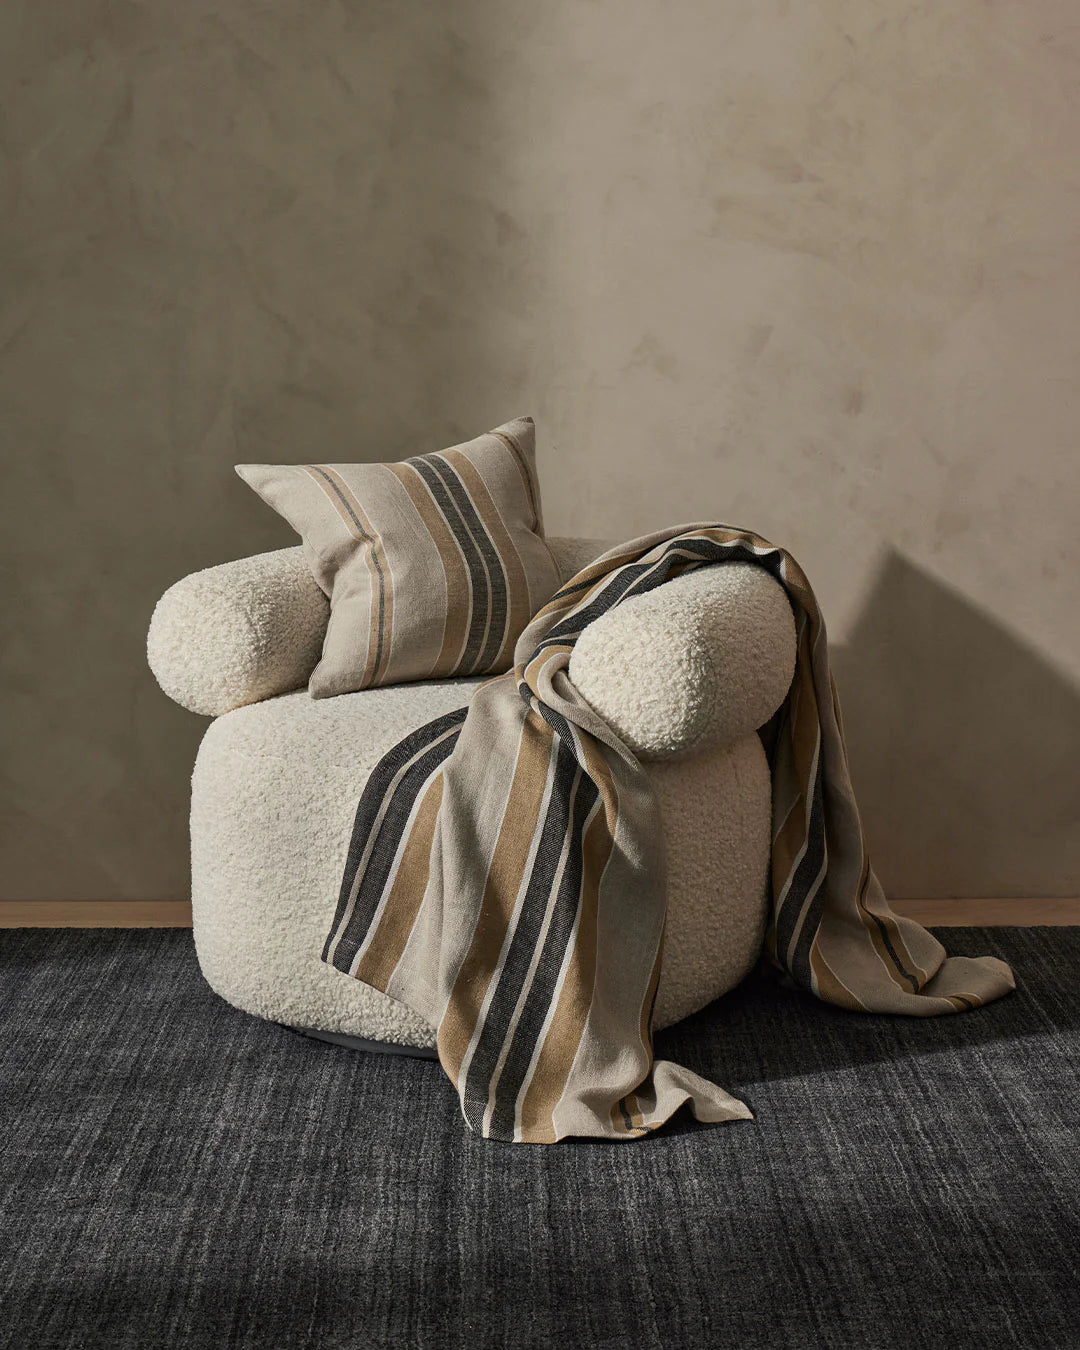 Crafted from the highest quality European Linen sourced from France and Italy, our Franco Linen Throw blankets are are luxuriously soft.